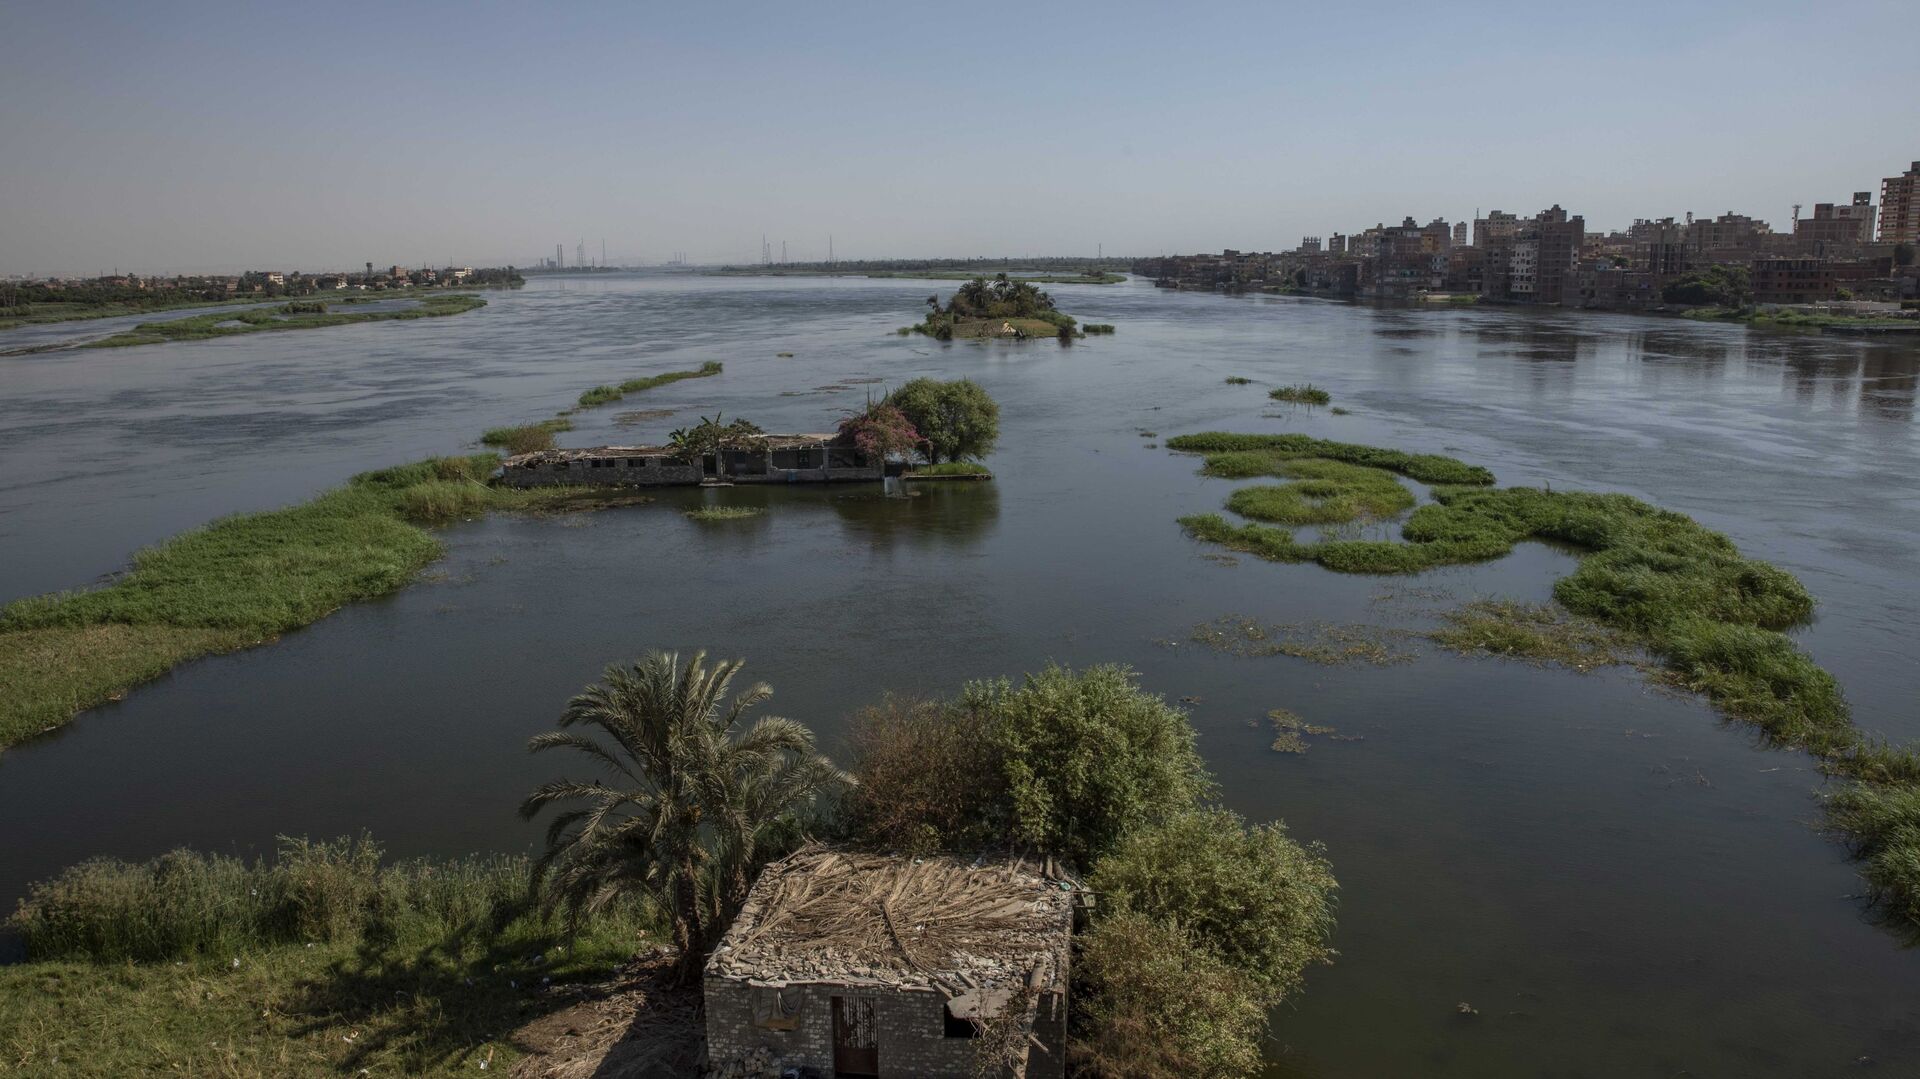 The River Nile as it passes through Beni Suef, Egypt. The Egyptians fear water levels will go down if the Ethiopian dam goes ahead. - Sputnik International, 1920, 14.06.2021